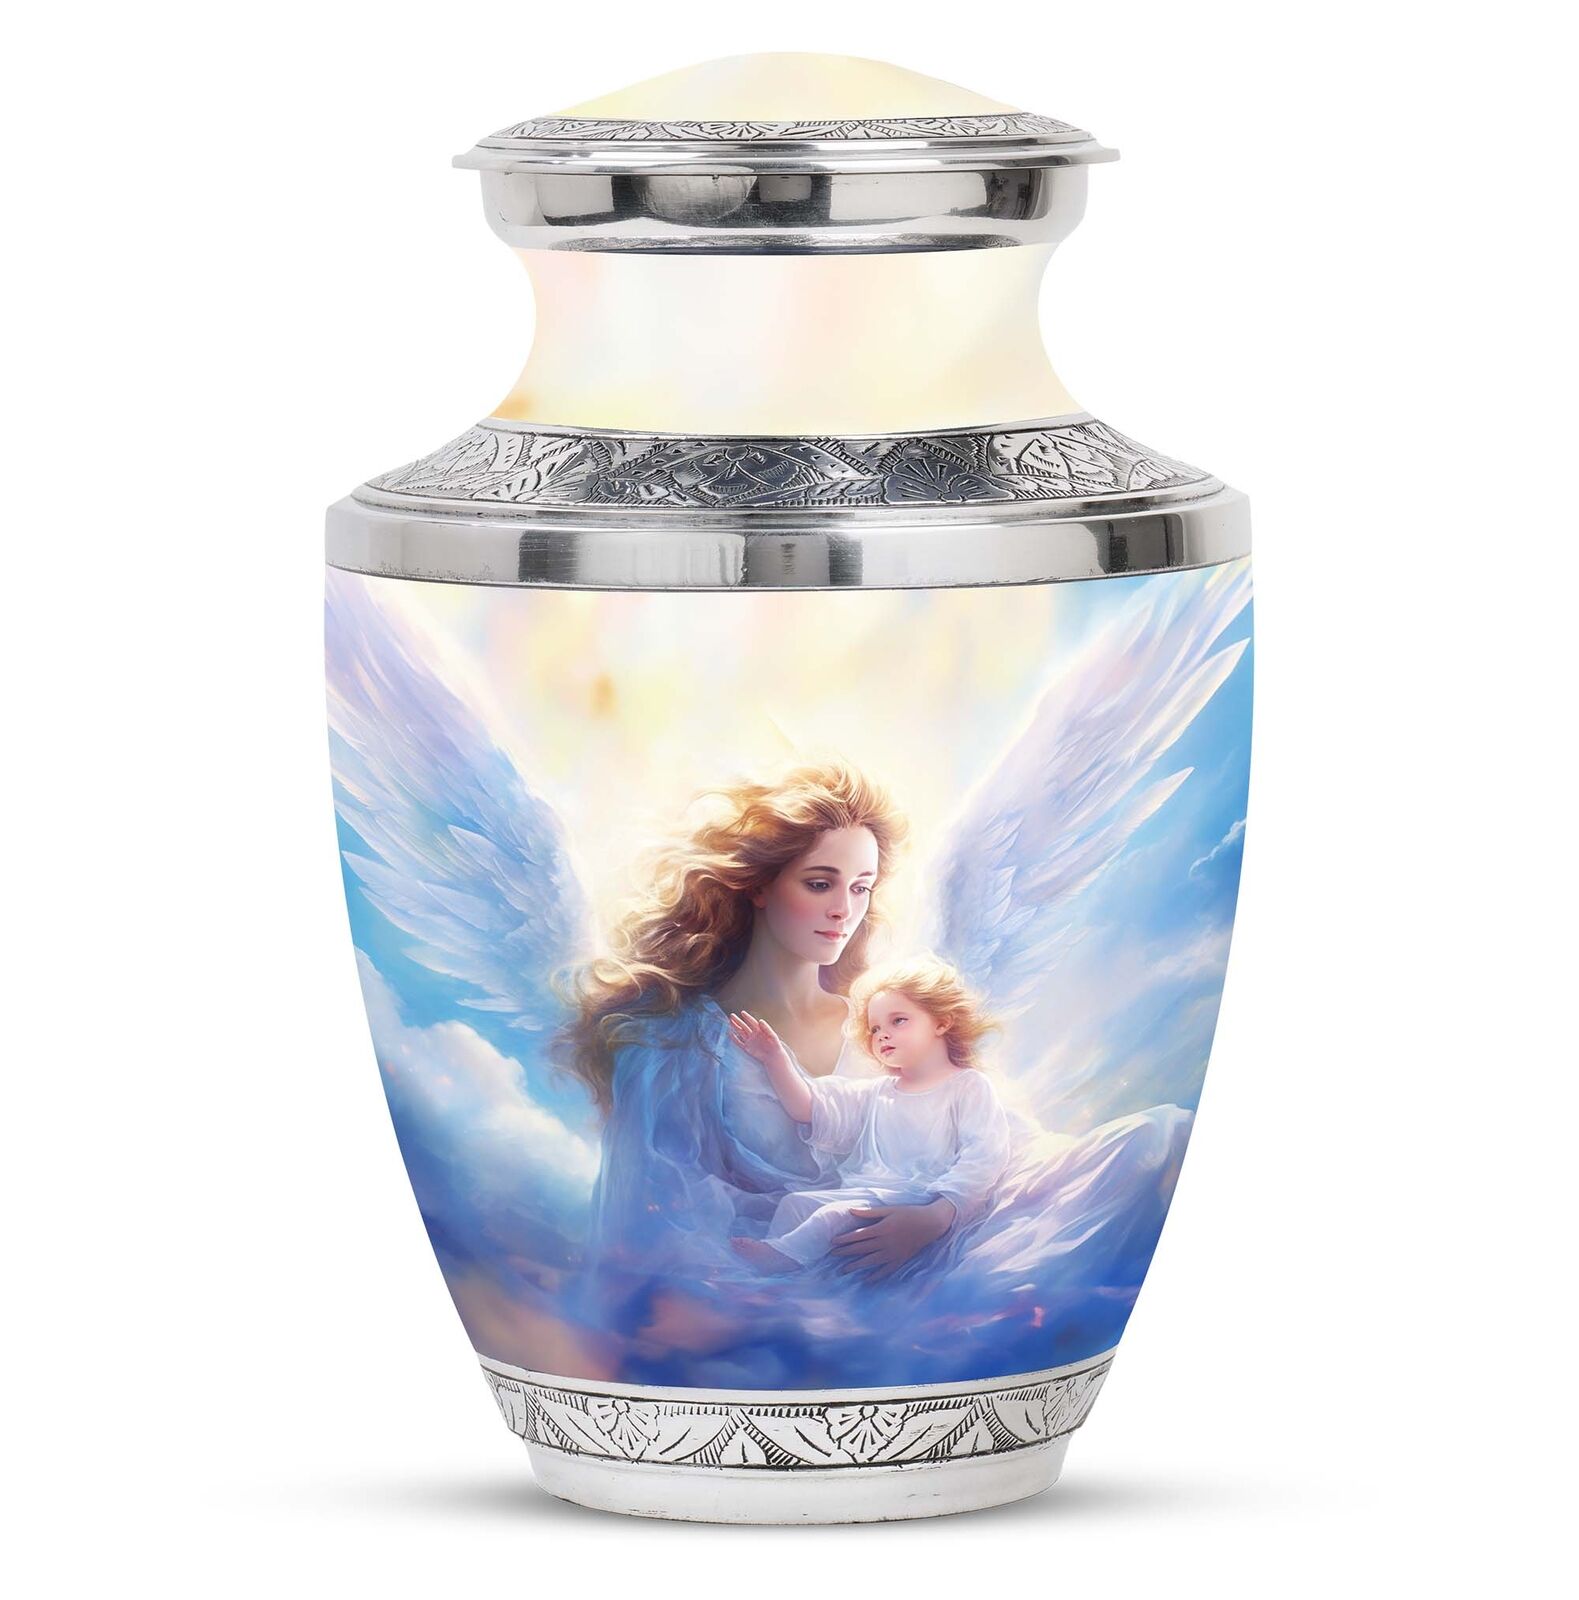 A Mother's Love in Heavens Large Burial Urns For Adults Size 10 Inch